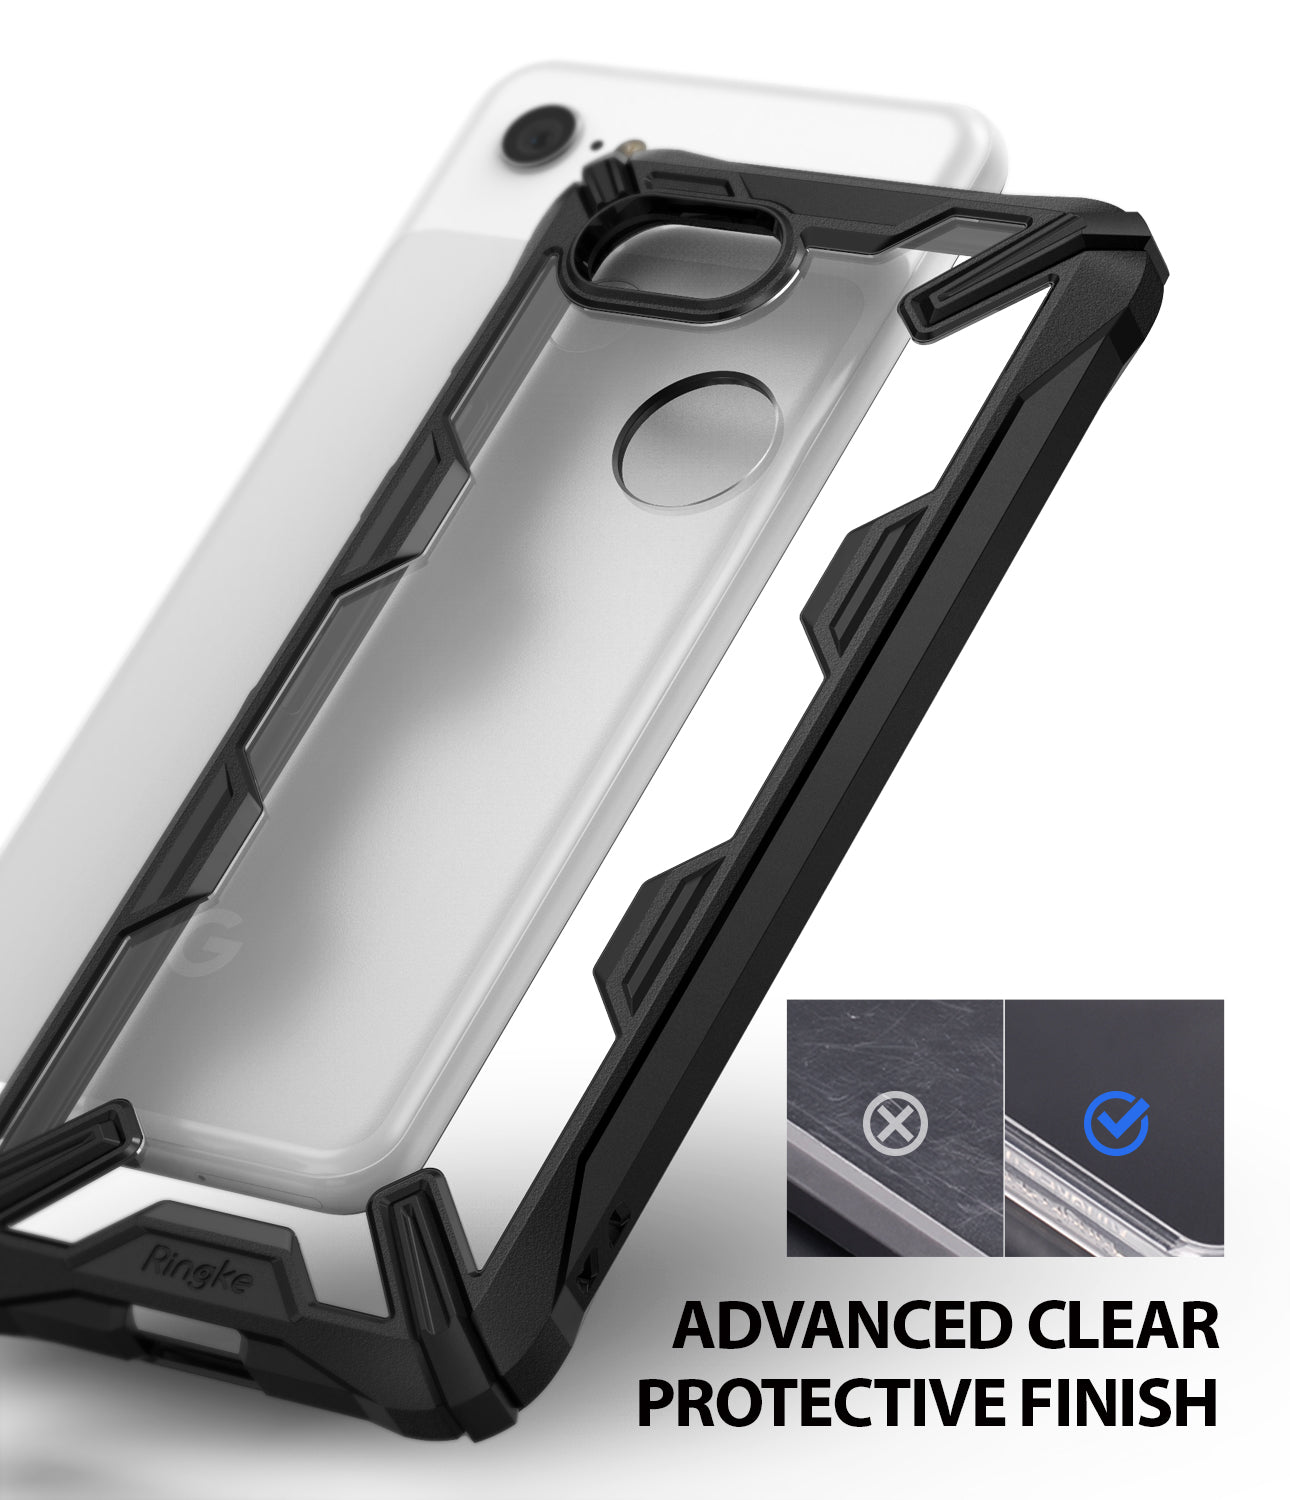 ringke fusion-x rugged heavy duty clear back case cover for google pixel 3 main anti cling technology